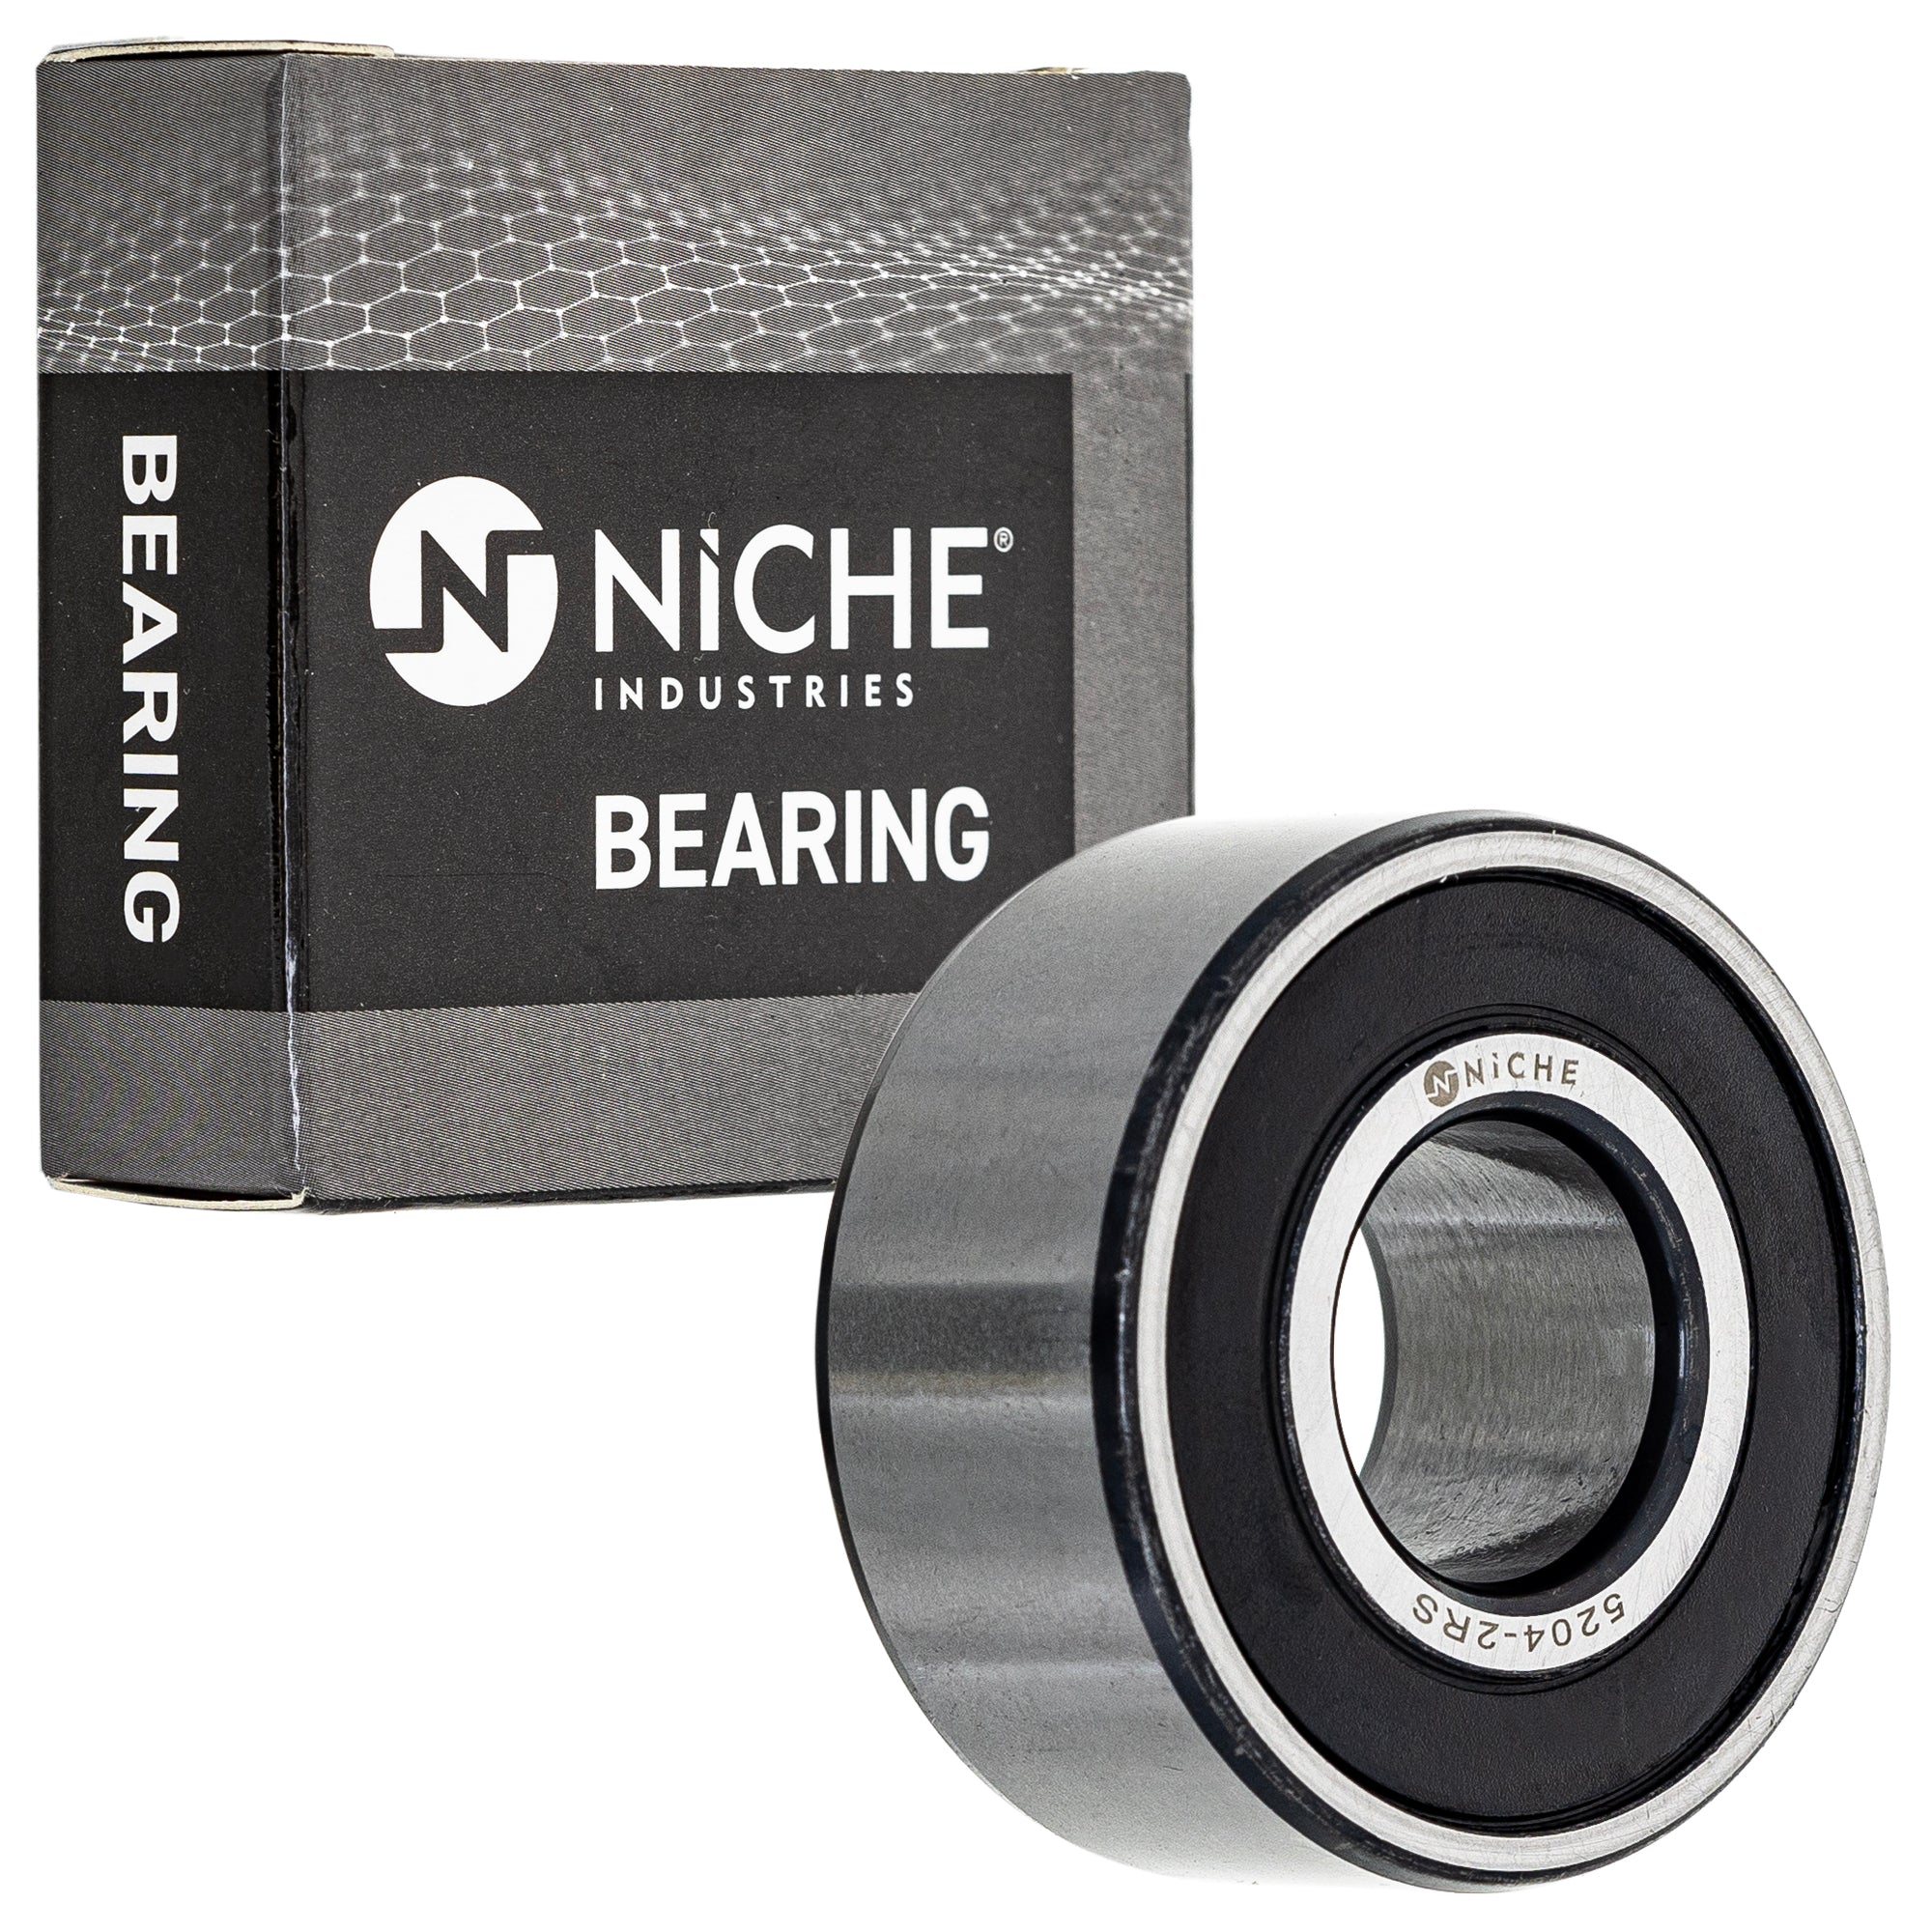 NICHE 519-CBB2260R Bearing & Seal Kit 2-Pack for zOTHER VTX1800T3